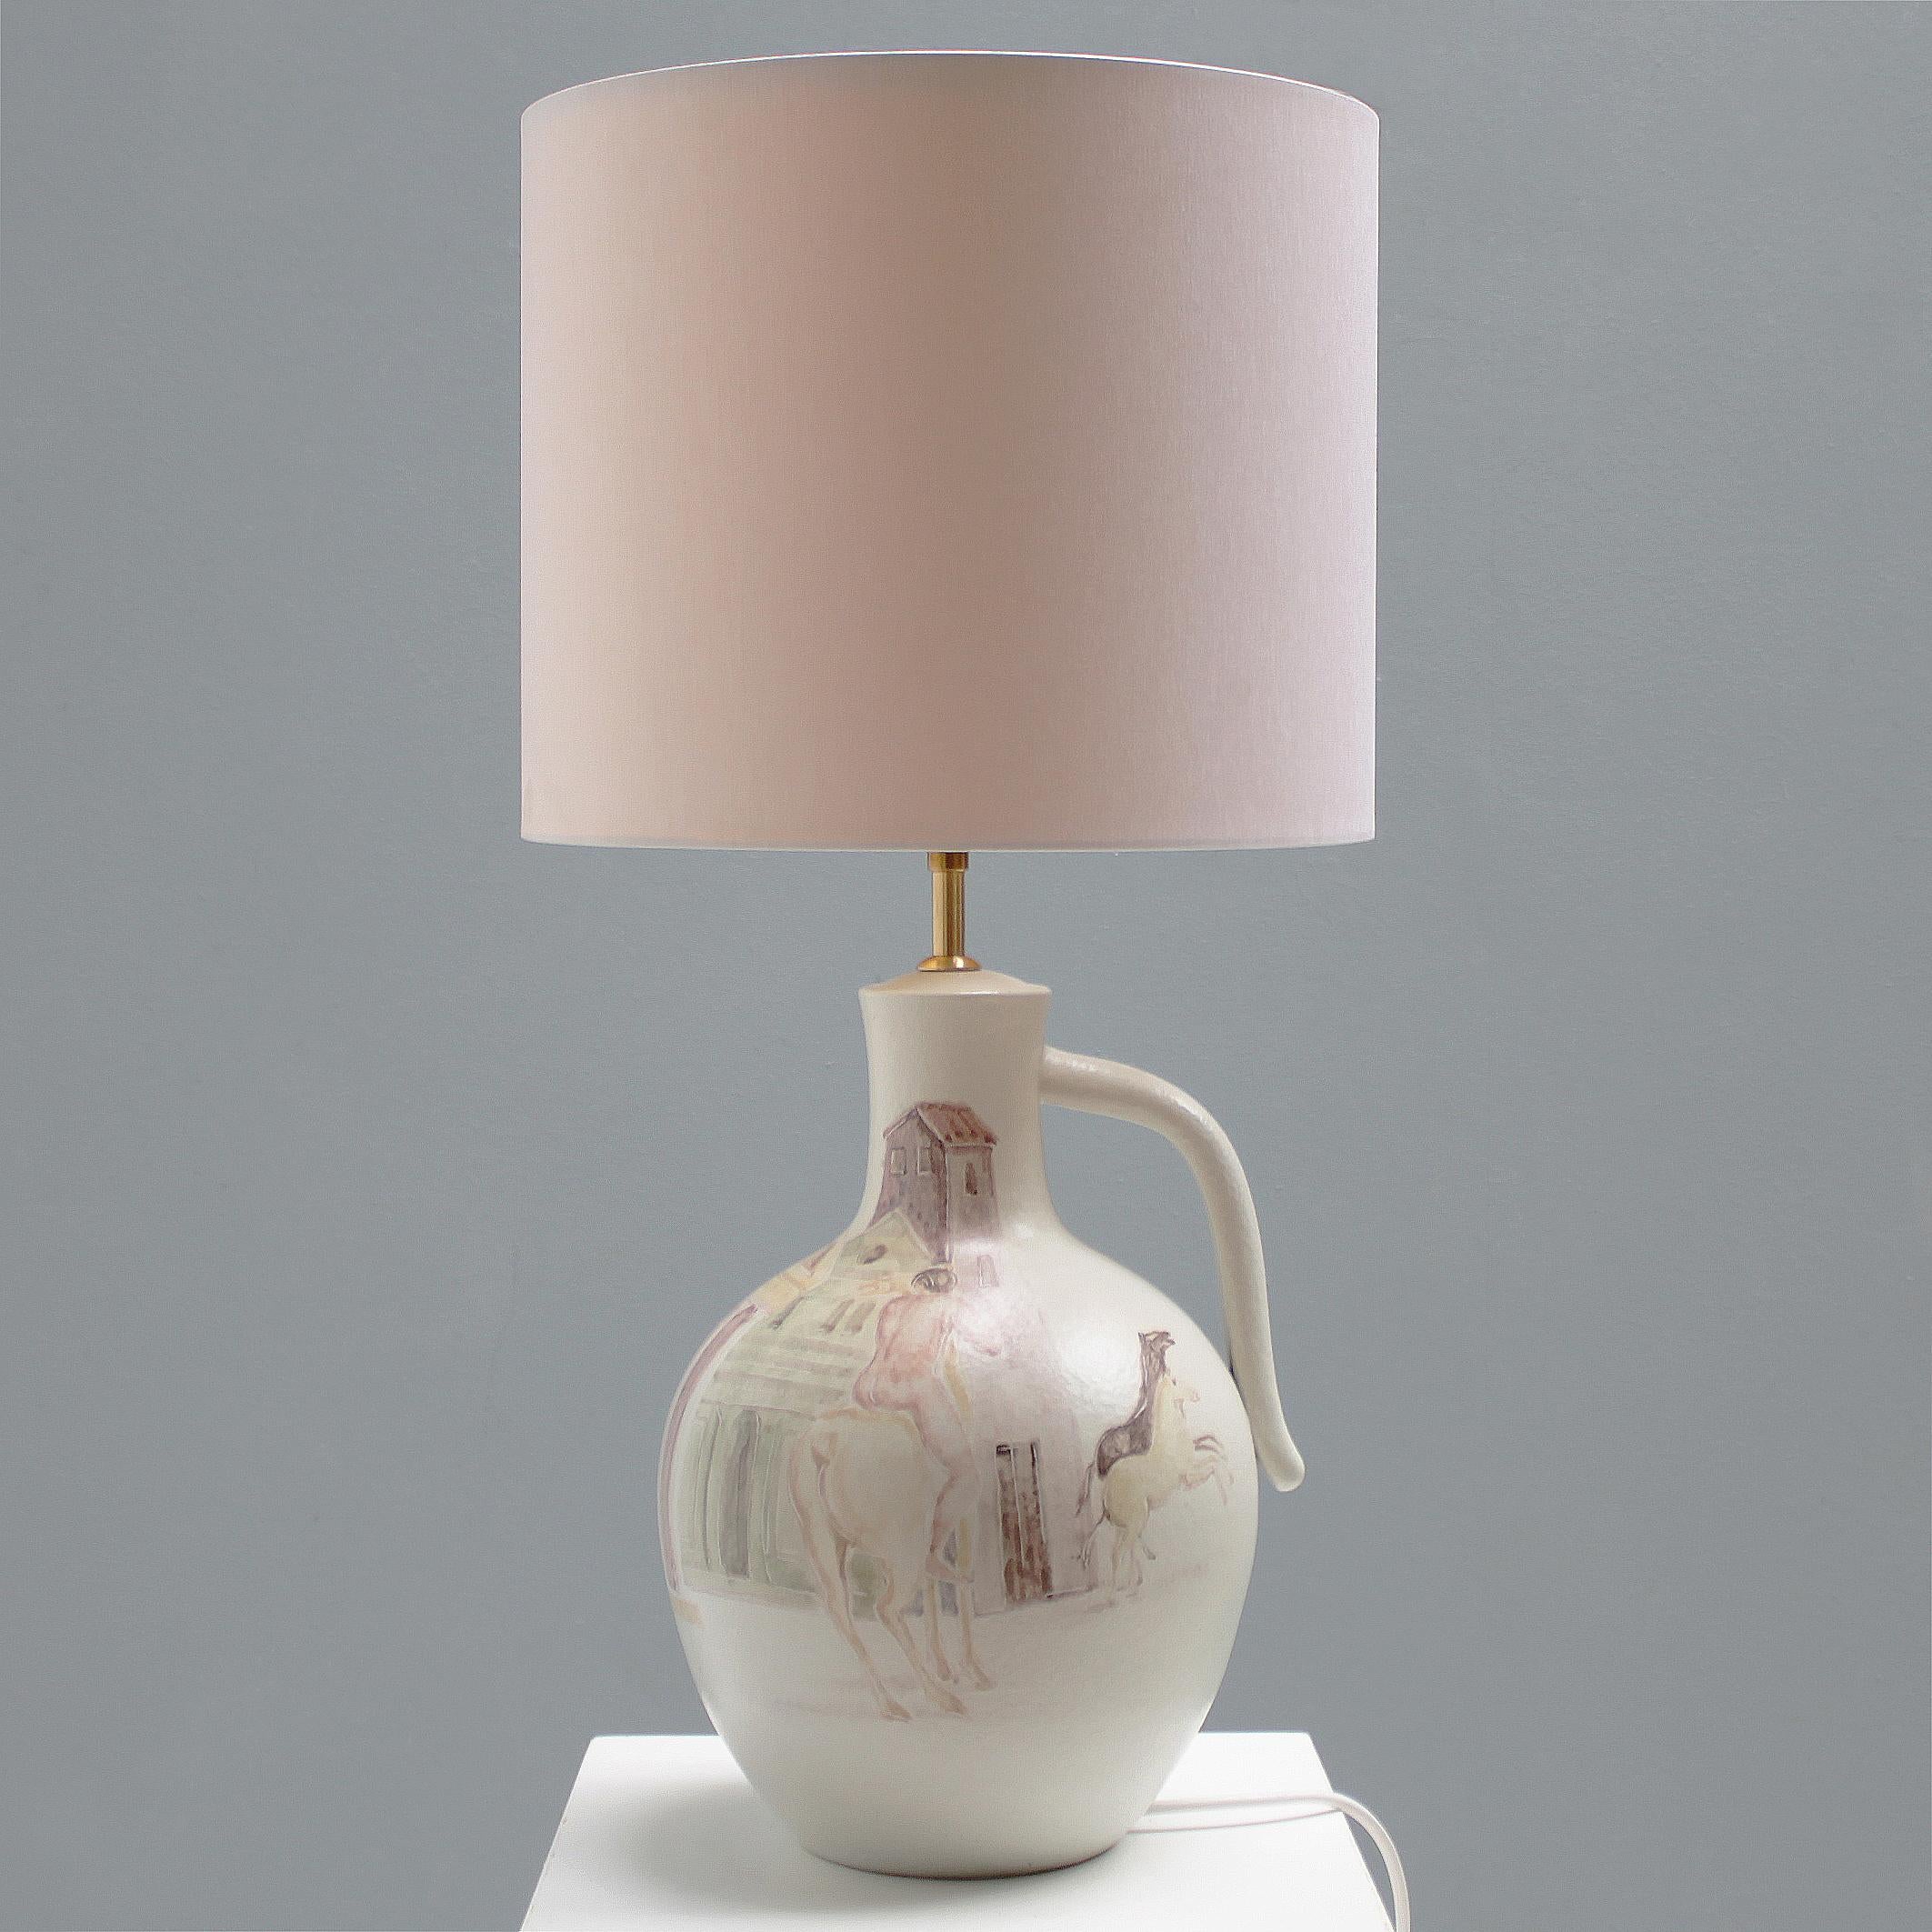 Table lamp as an earthenware vase, hand painted Etruscan figures in beautiful light earth tones. Rare early work by the Italian artist Marcello Fantoni. 
Dimensions (without shade): height inc. bulb holder 33.5 in. (42 cm), diameter: 15.4 in. (22